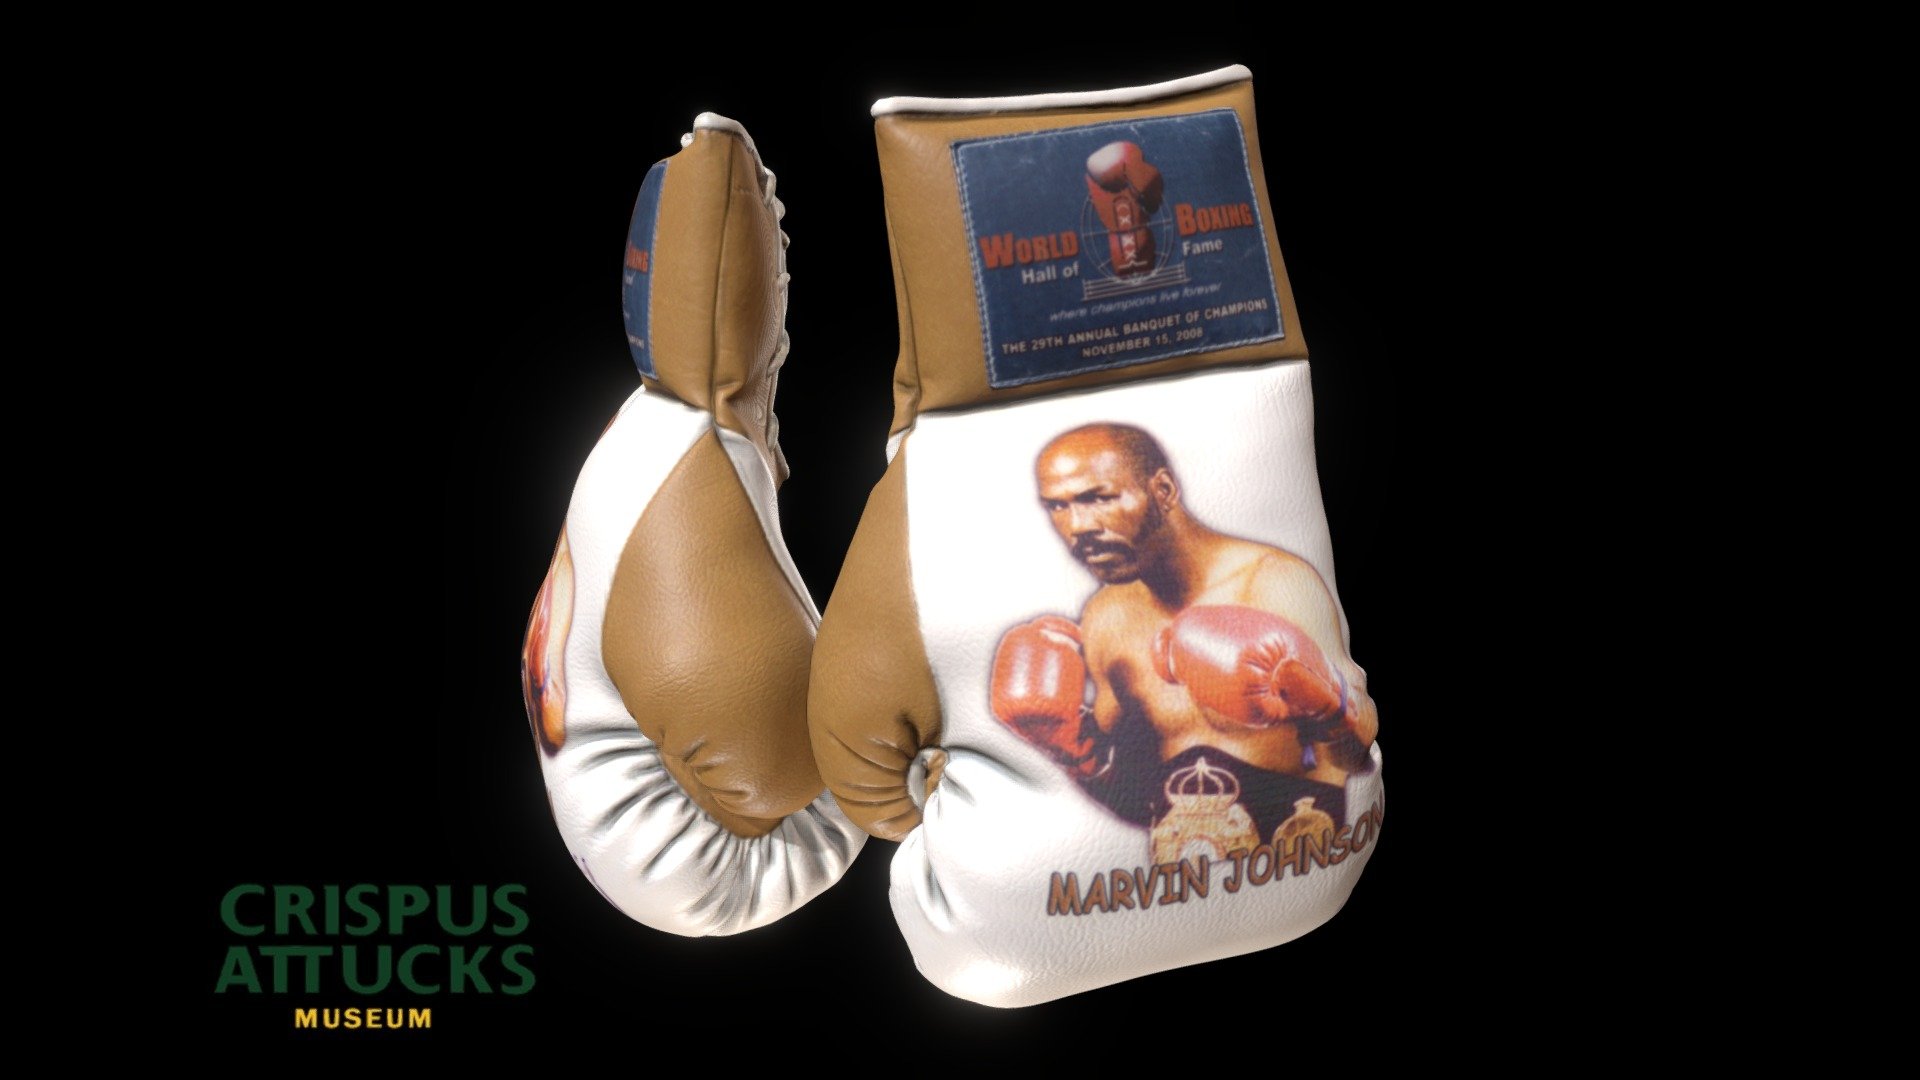 Boxing Federation of America Championship Commemorative Gloves, 1979 (from the Marvin Johnson Collection).

Marvin Johnson is an American former boxer who was a 3-time light-heavyweight champion of the world. As an amateur, Johnson fought in the 1972 Olympics in Munich, winning a bronze medal, and made his way up the professional ranks in the light heavyweight division soon thereafter. Johnson was inducted into the World Boxing Hall of Fame in 2008. His nickname is &ldquo;Pops